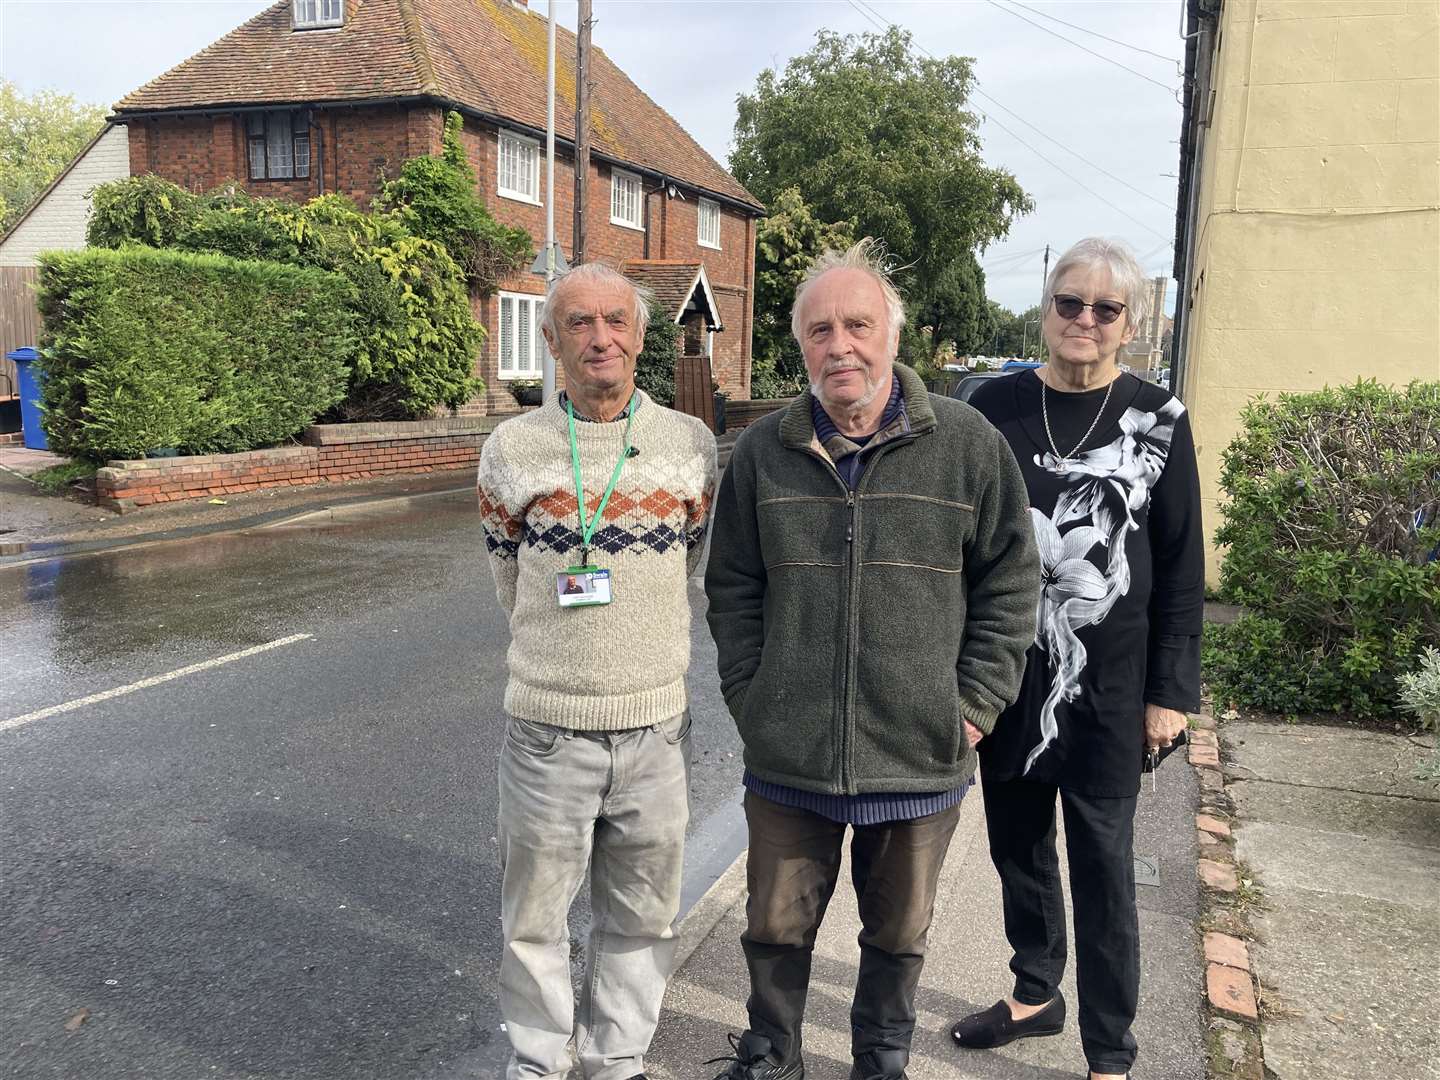 Cllr Tony Winckless, left, and residents Bill Francis and Julie Glass near the water leak in North Street, Milton Regis